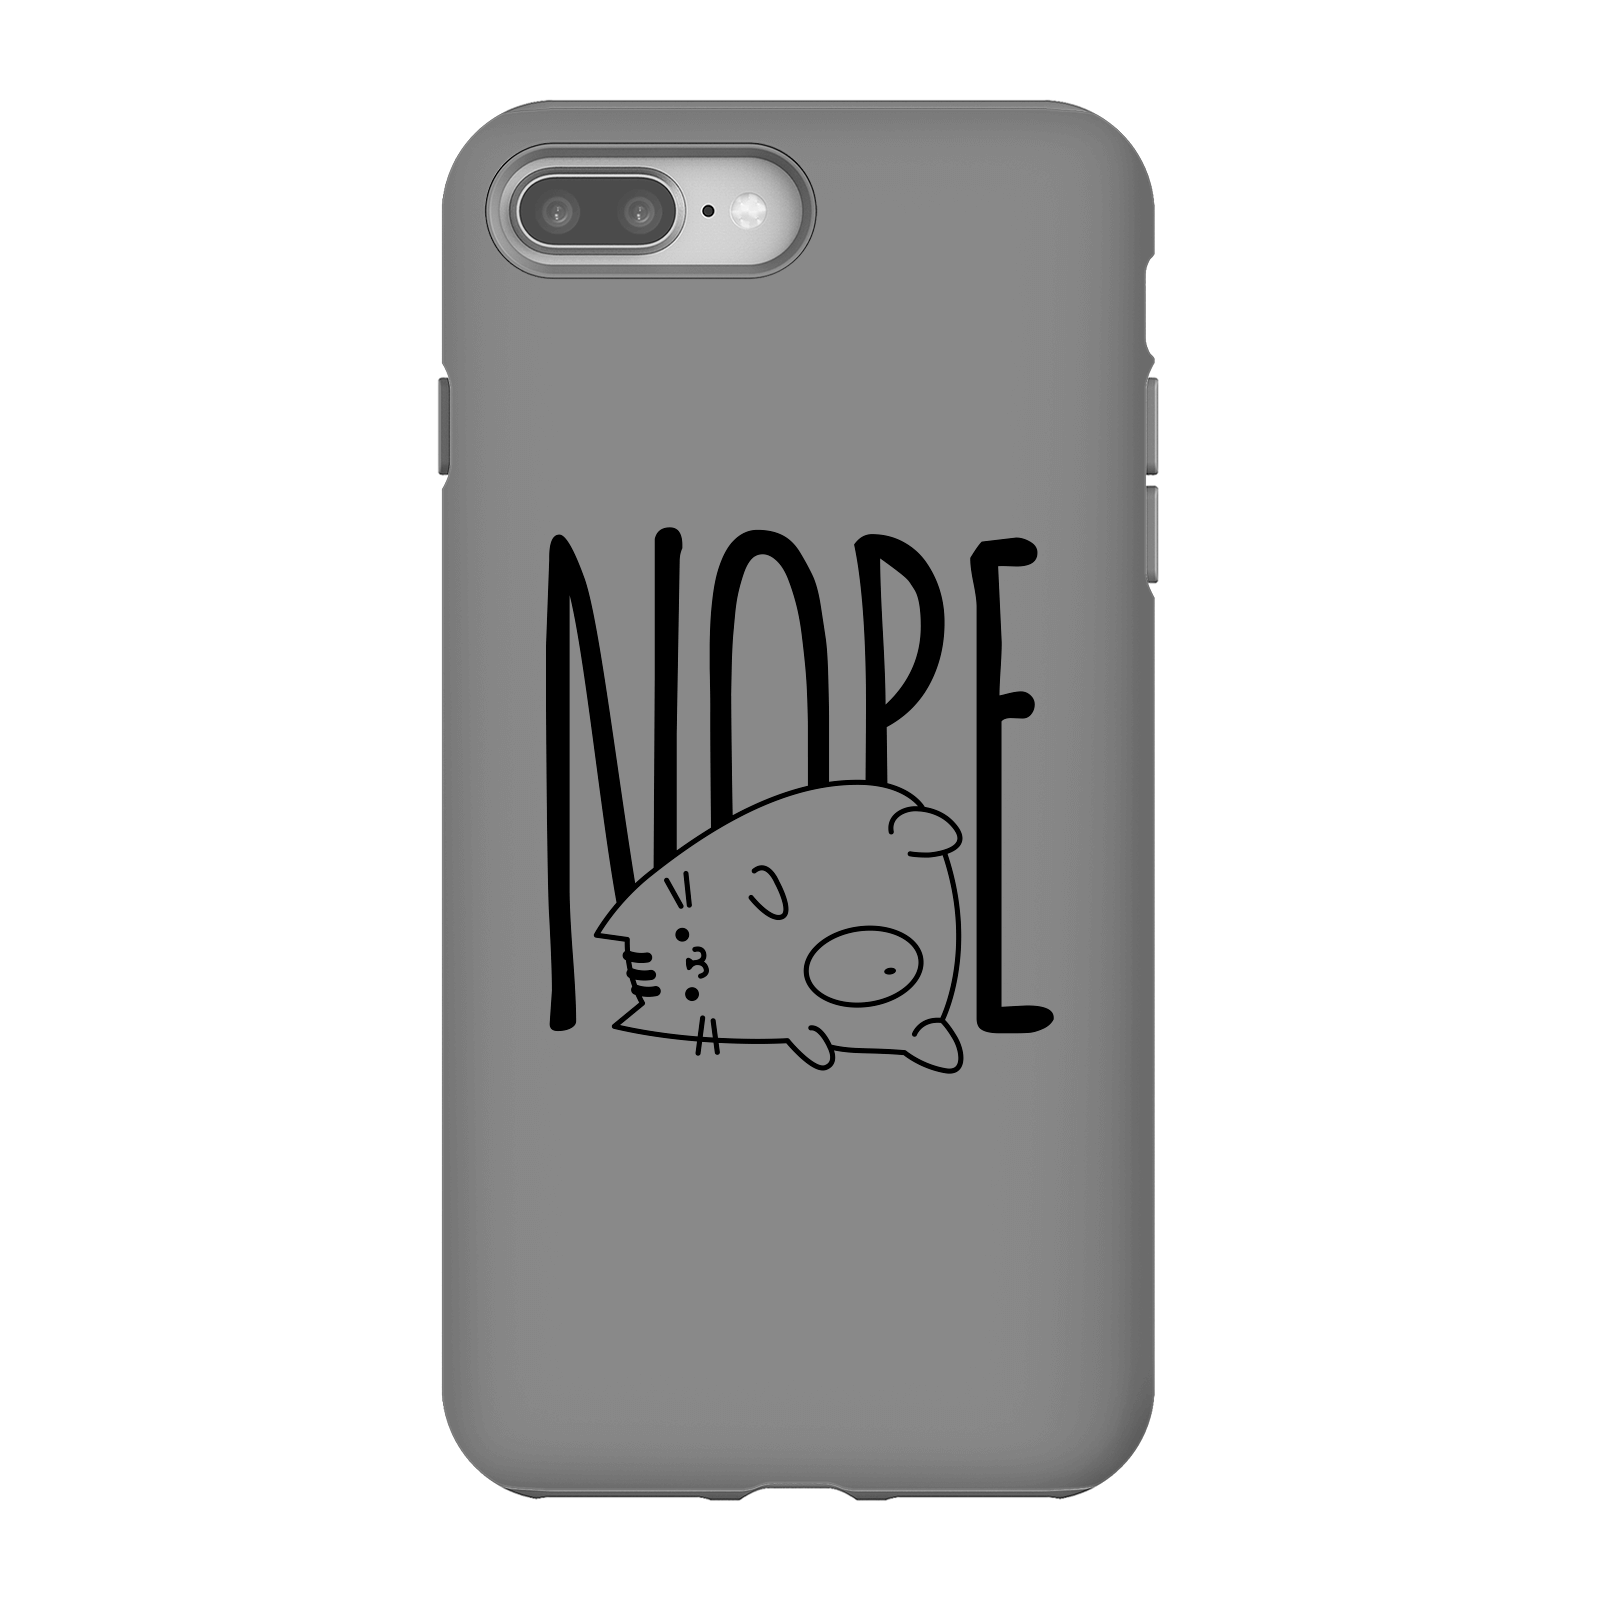 Nope Phone Case for iPhone and Android - iPhone 8 Plus - Tough Case - Matte